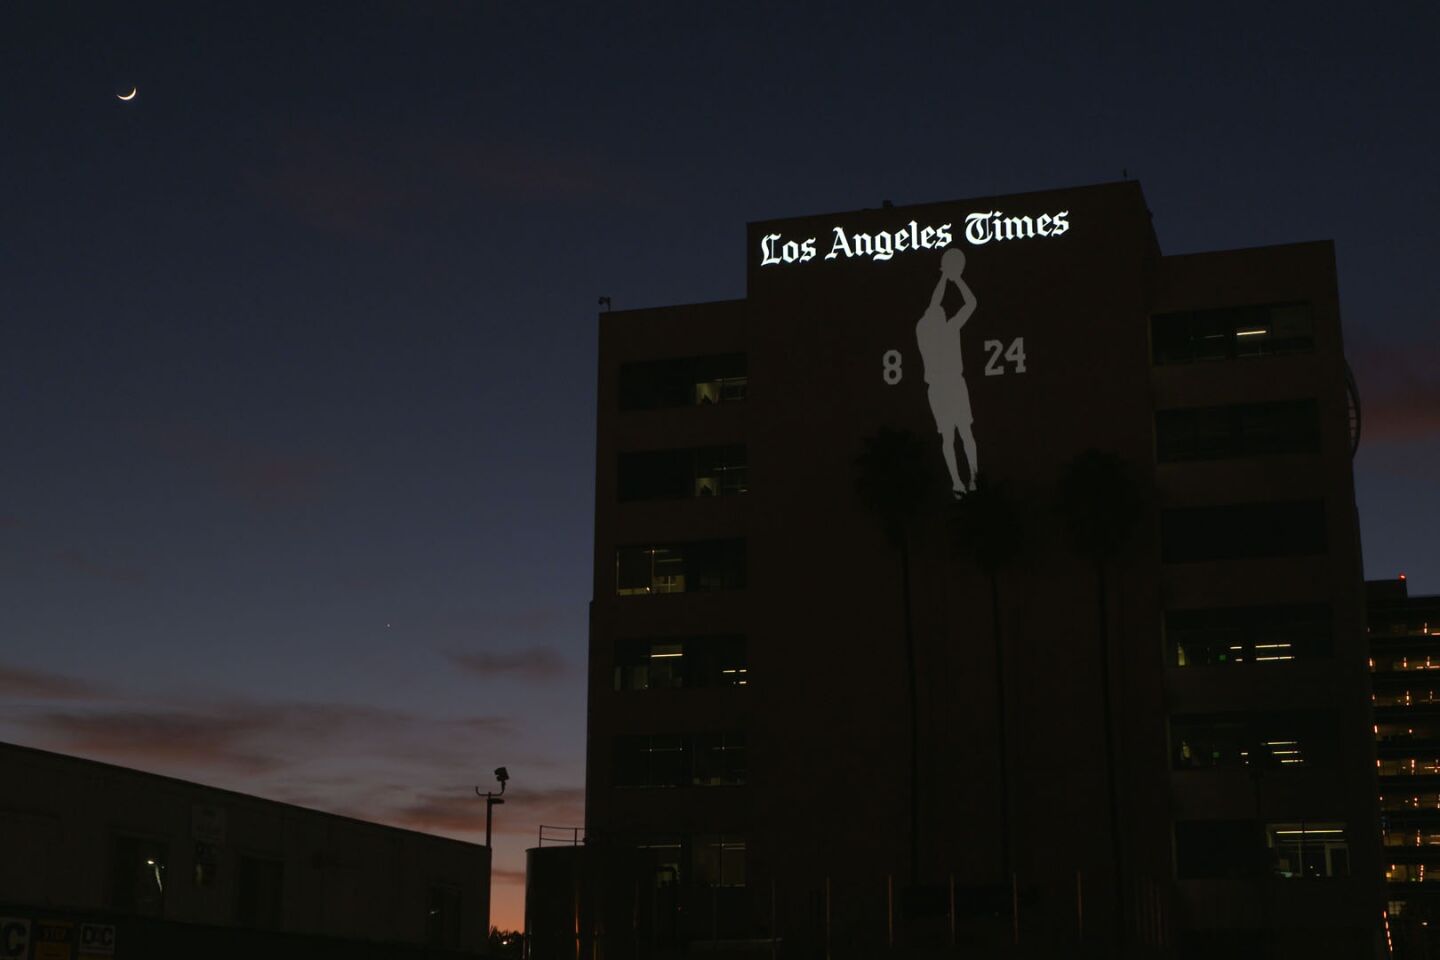 A tribute to Kobe Bryant is projected on the Los Angeles Times building.